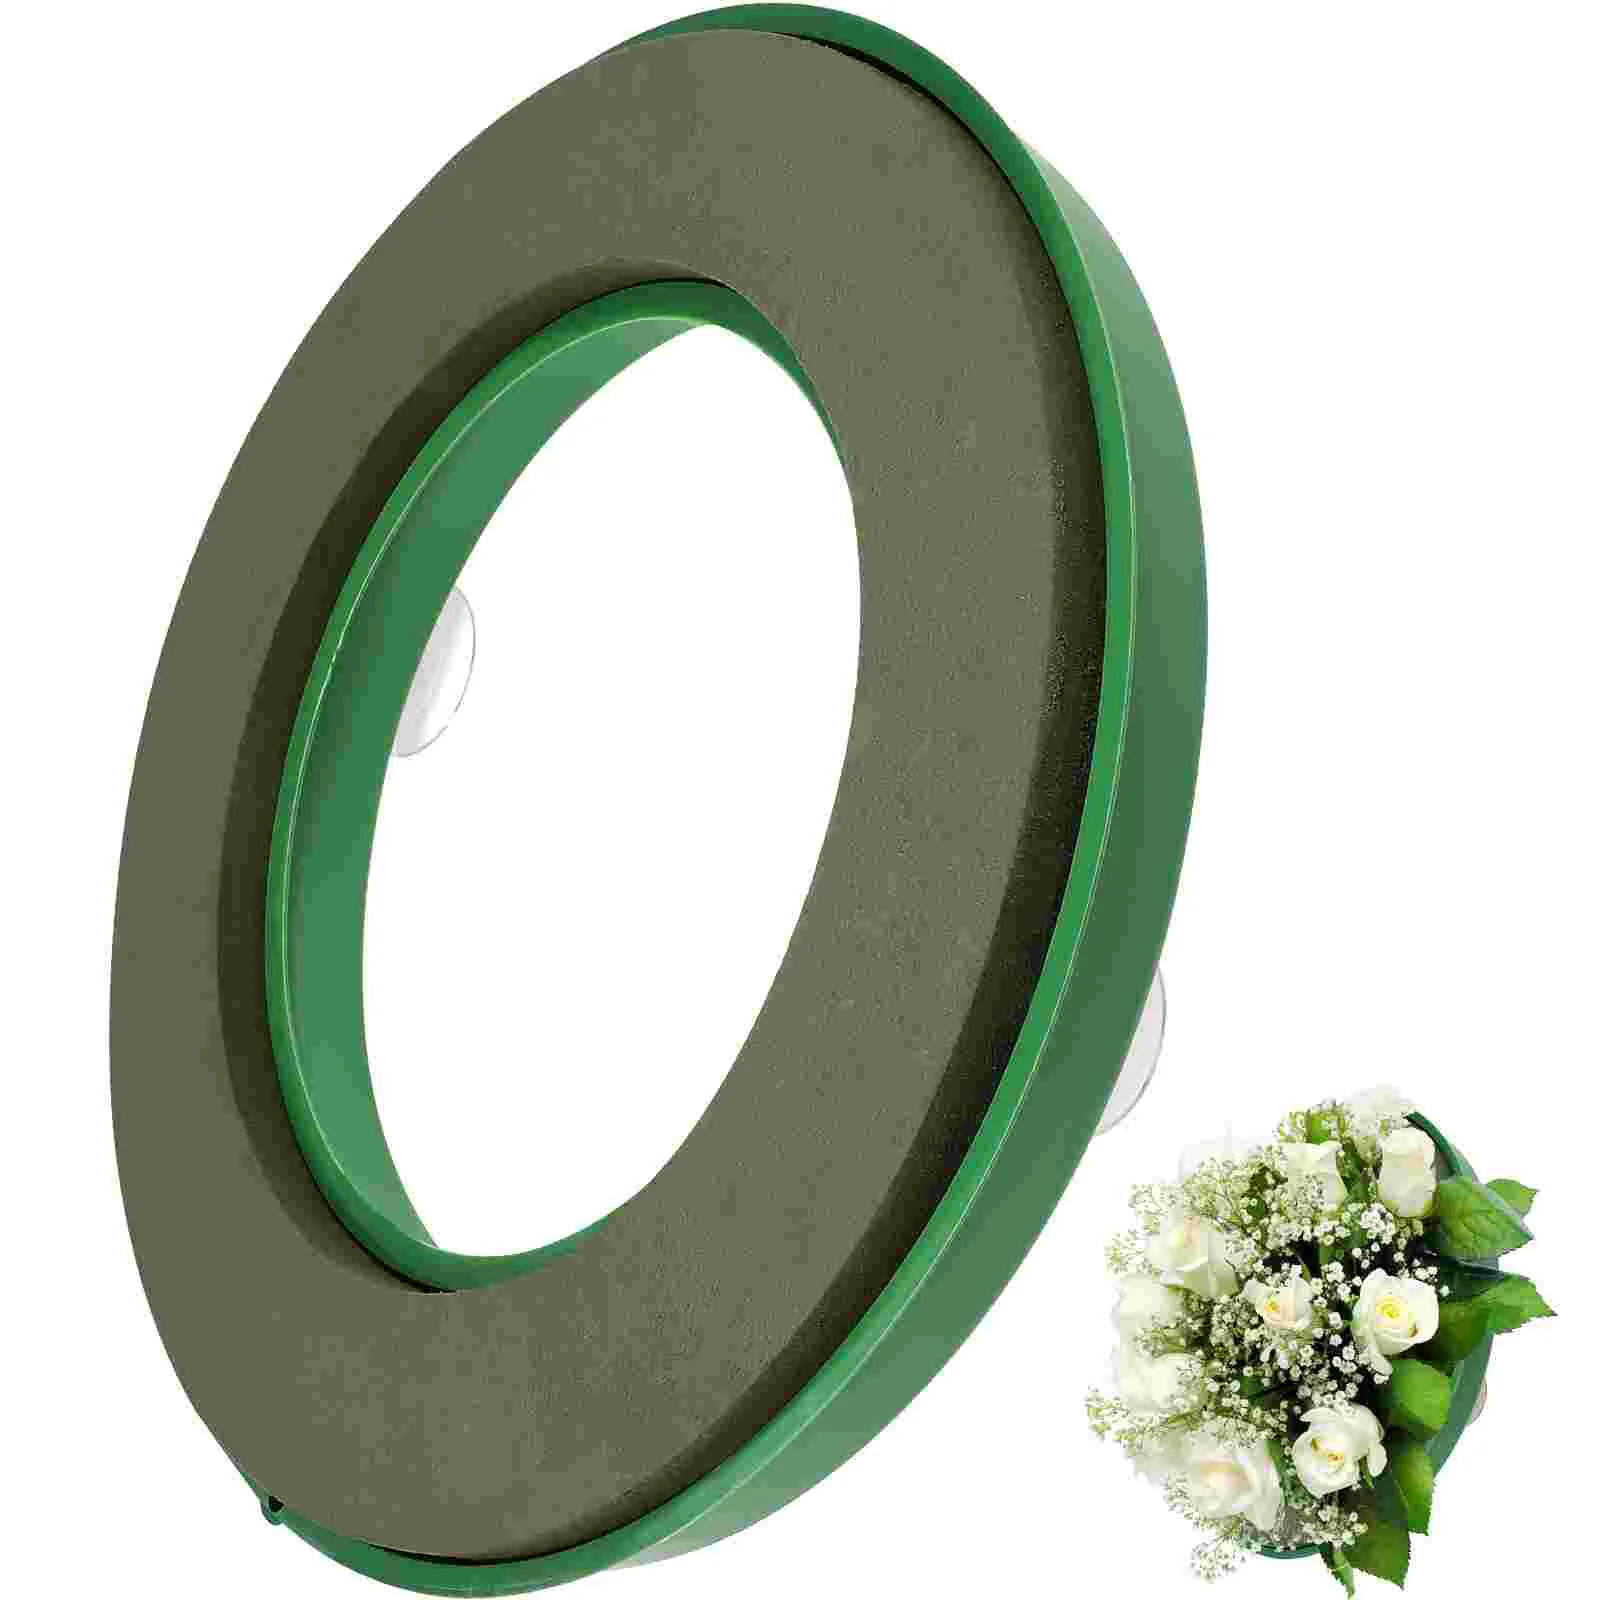 

Floral Foam Ring with Mud Ring and Suction Cups DIY Flower Arrangement Round Ring Wedding Wet Dry Floral Foam Fixed Decor Tool